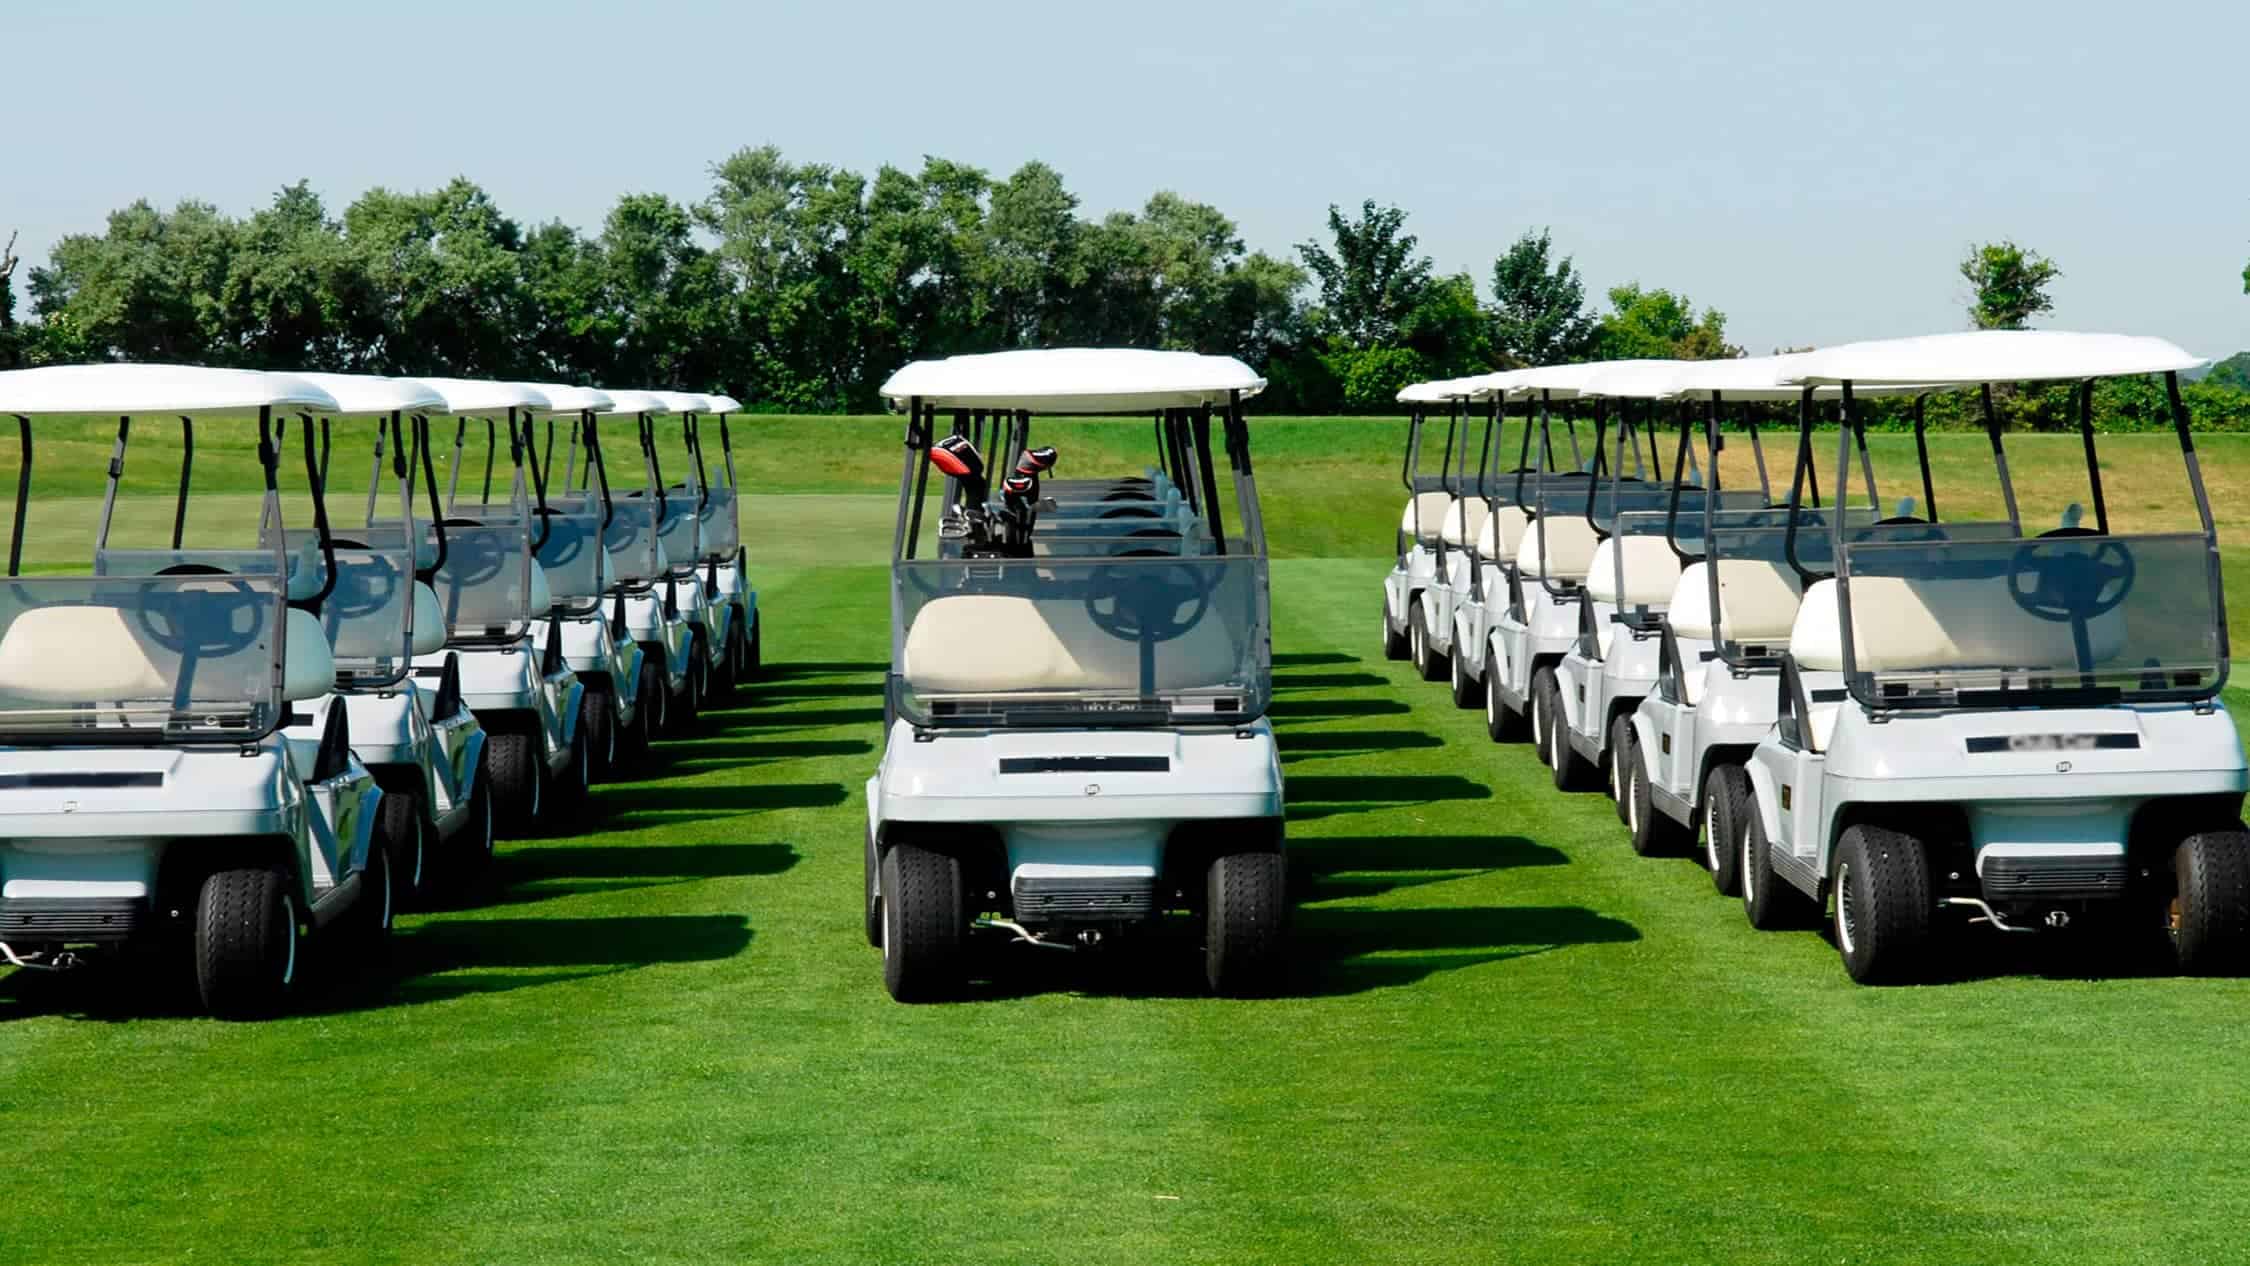 Rows of battery-powered golf carts